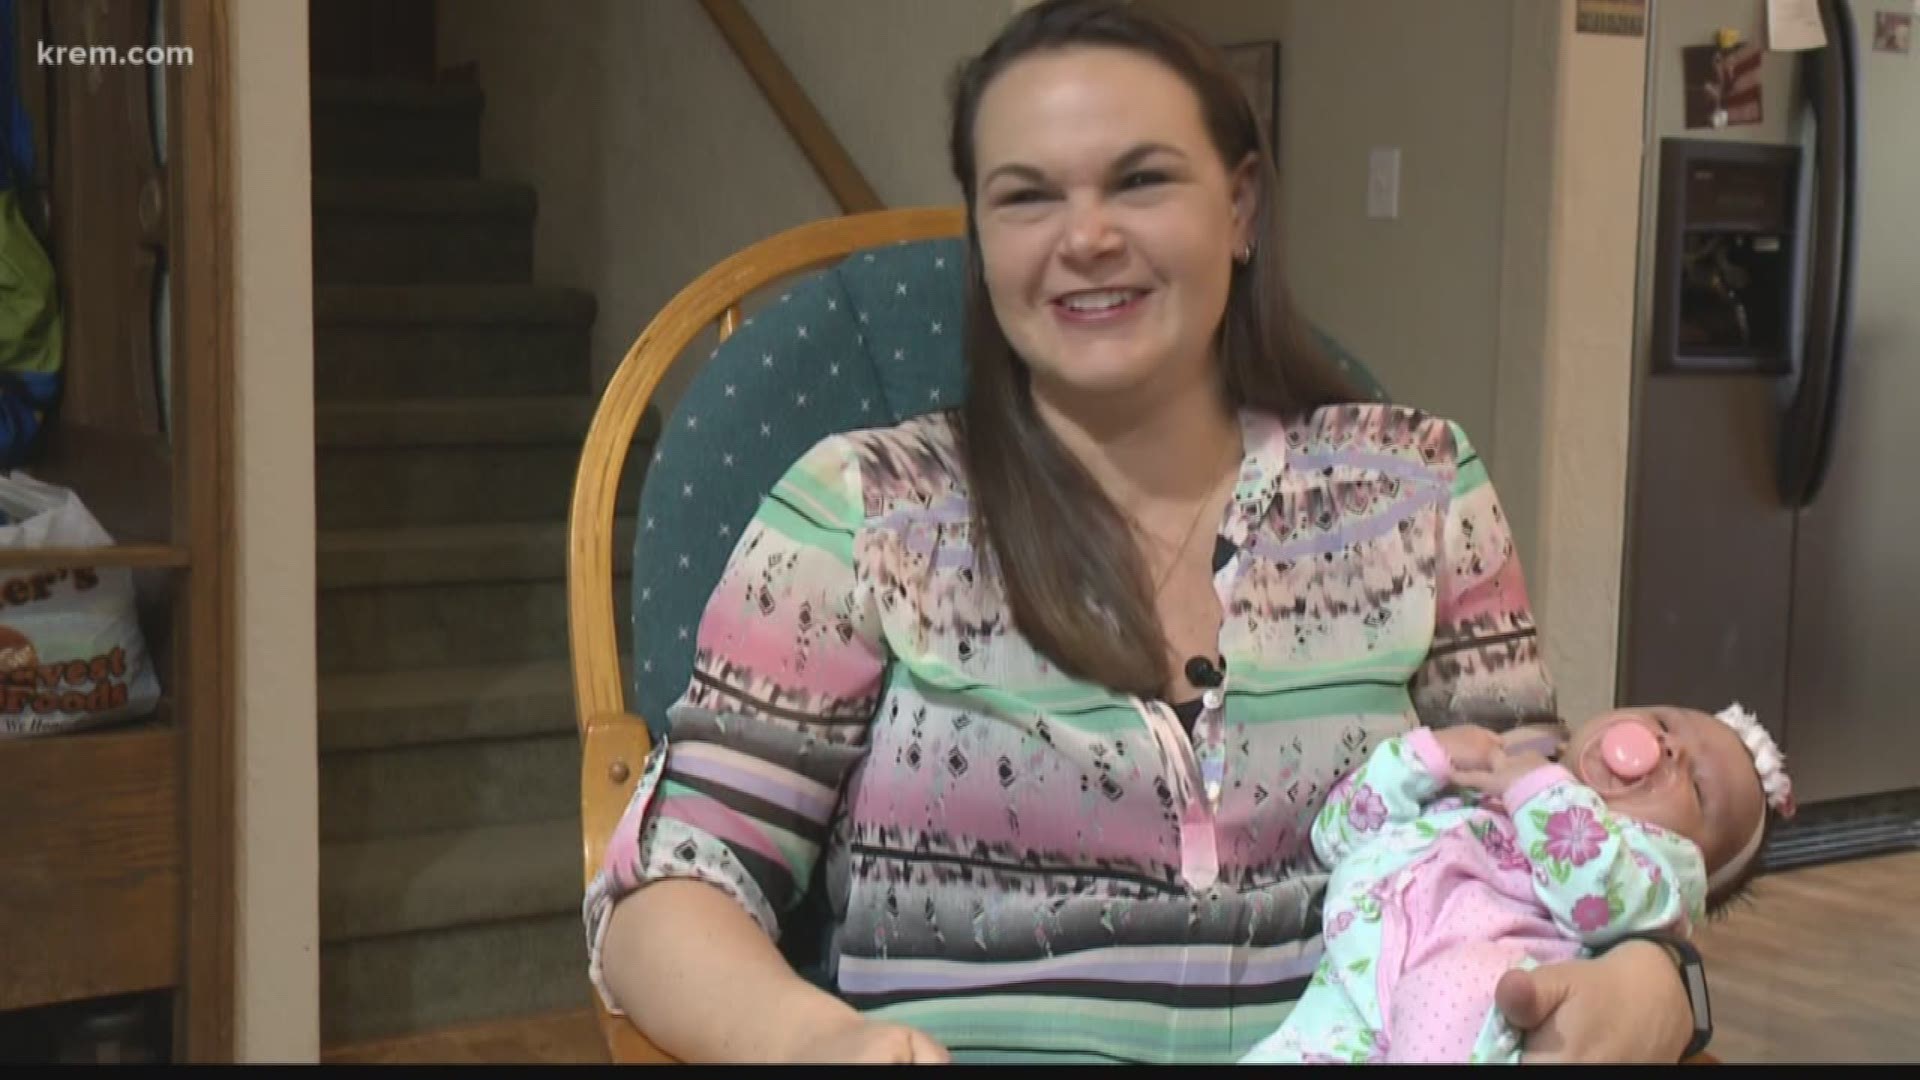 Oh baby! ' Spirit Lake mother gives birth in car at fire station